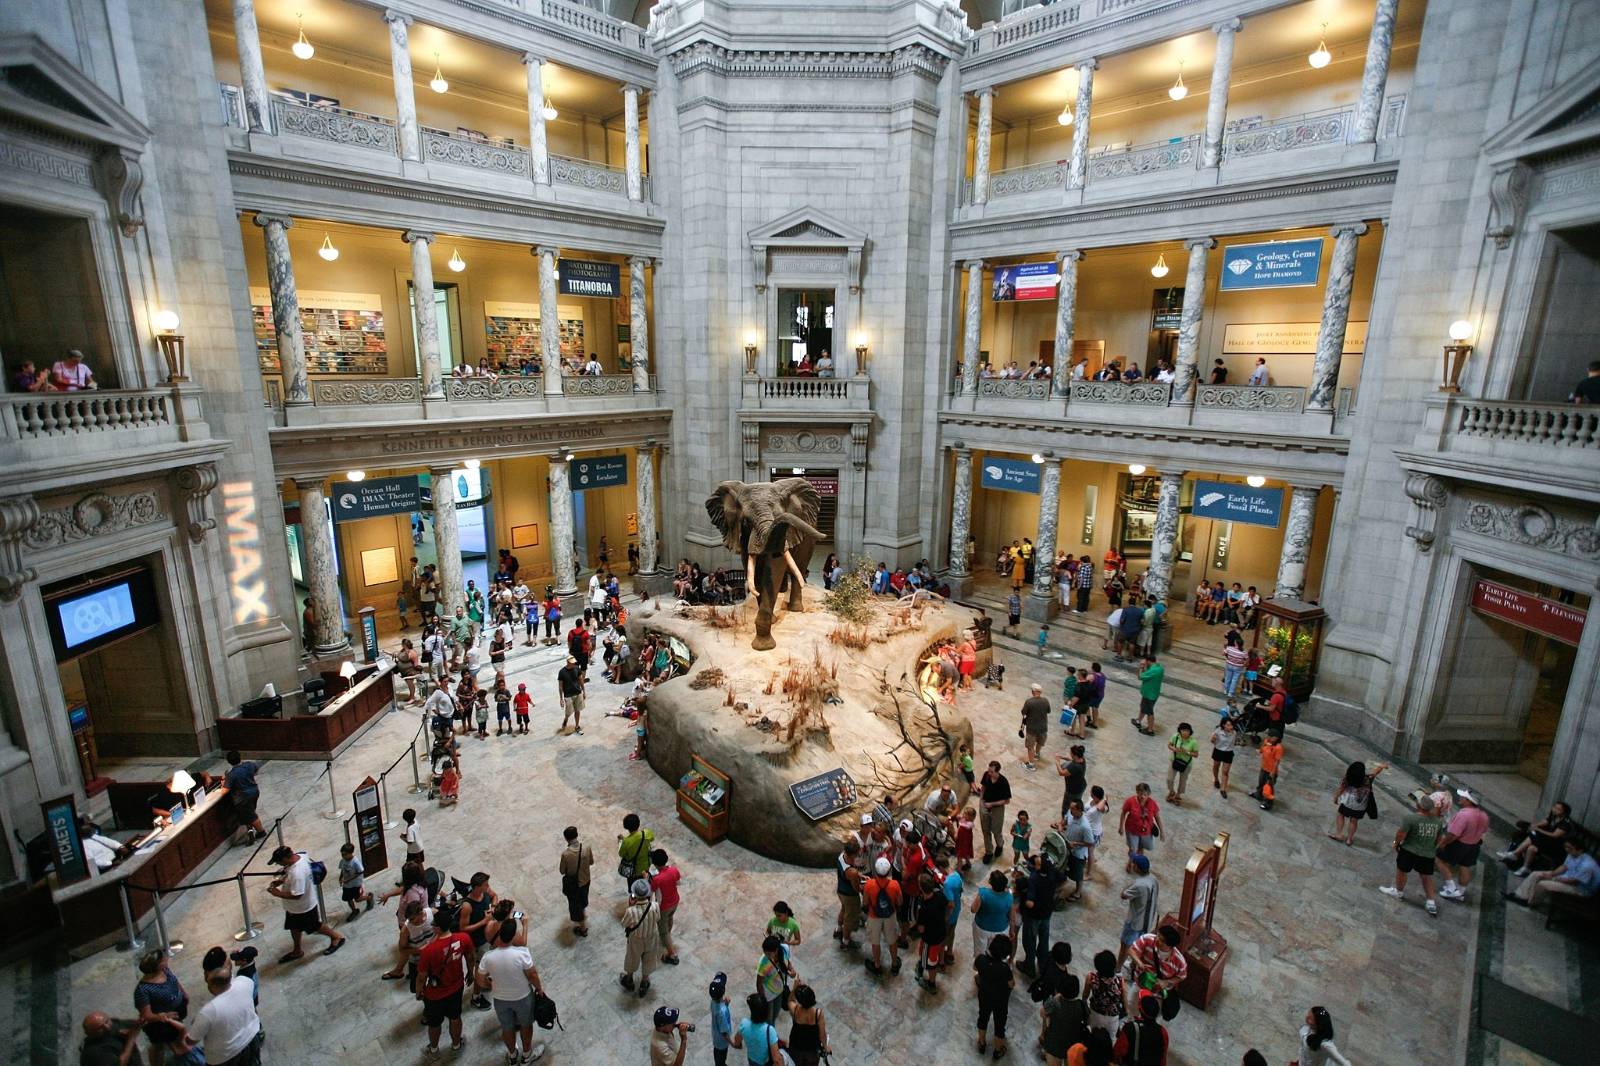 Smithsonian Institution Museum of Natural History